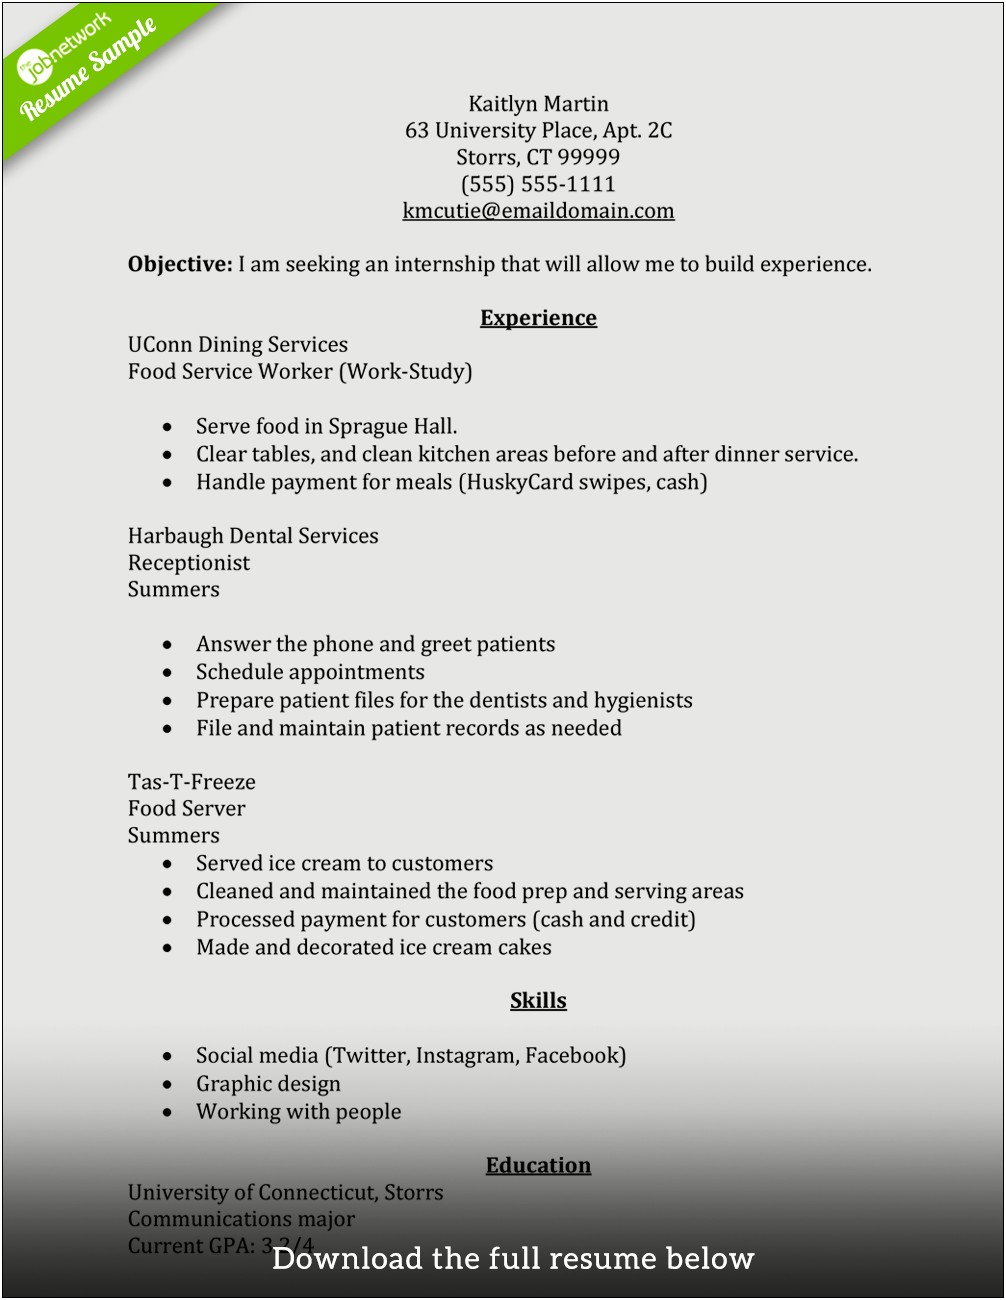 Resume Tips For Limited Work Experience